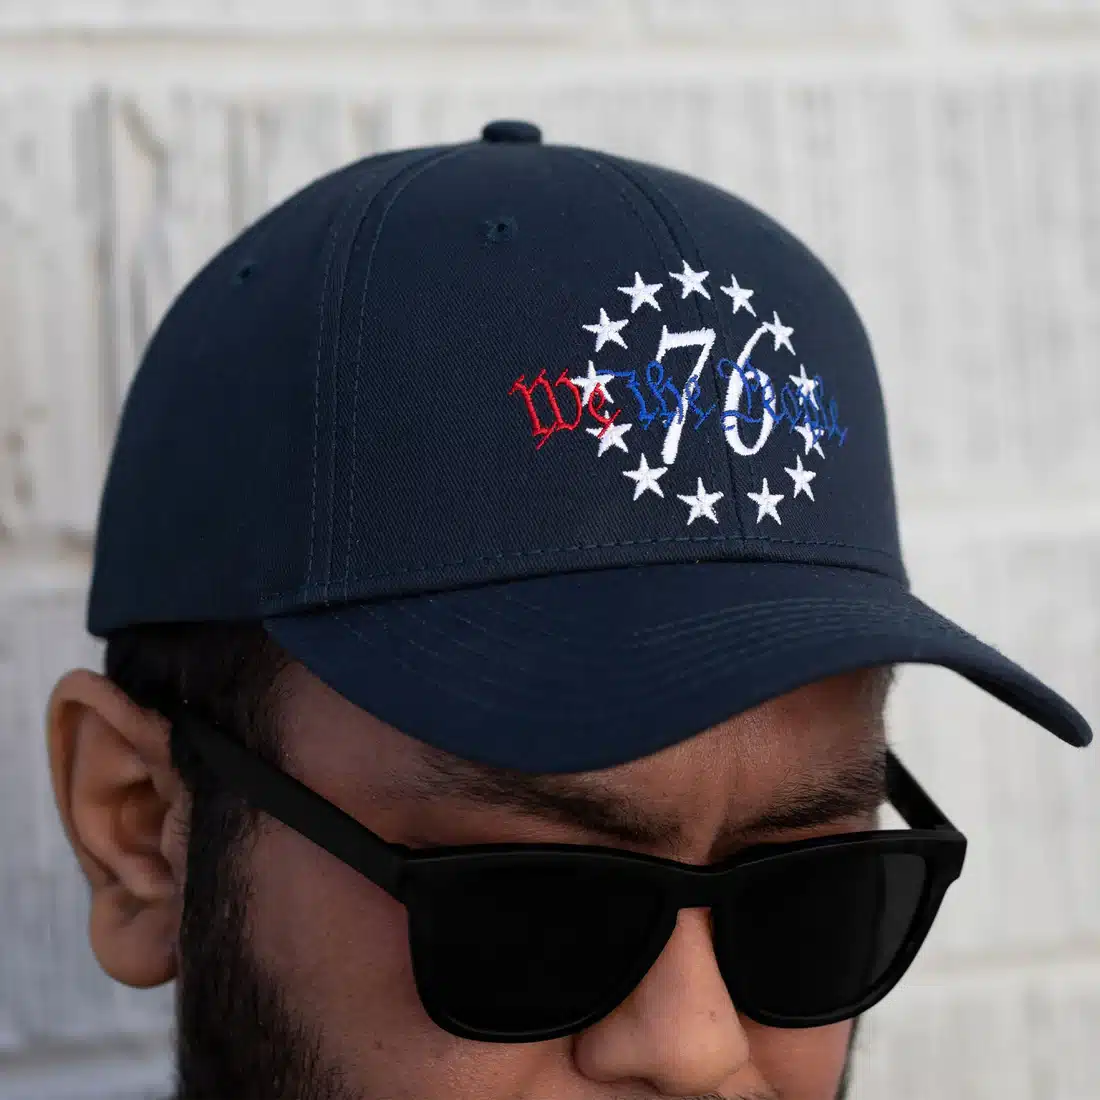 https://cityarsenal.com/product/grunt-style-hat-we-the-people-blue-gs5552/